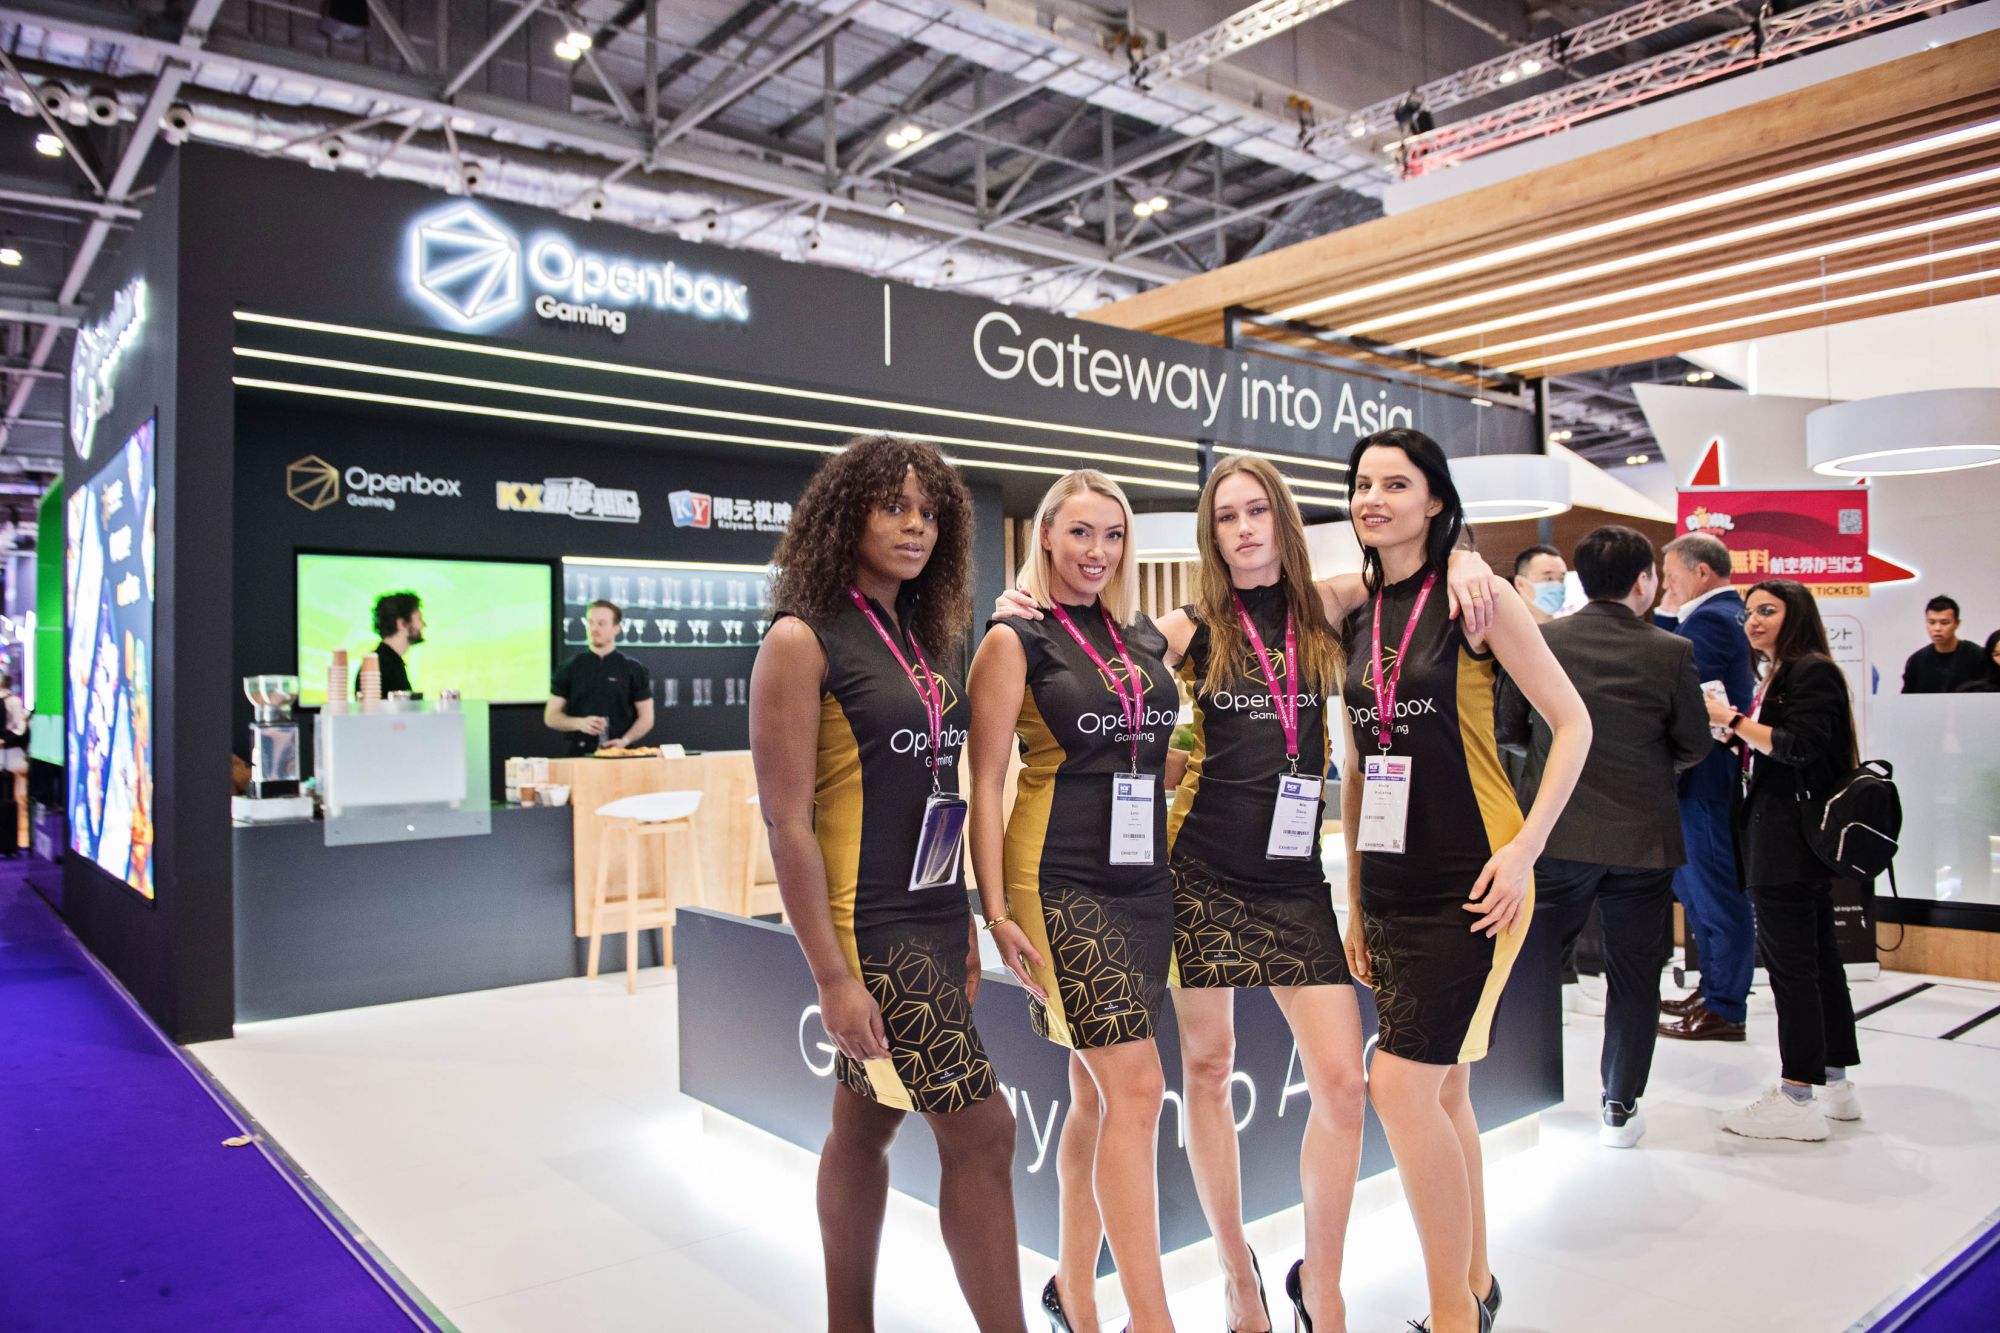 Models stand in front of Exhibition stand at the Excel London